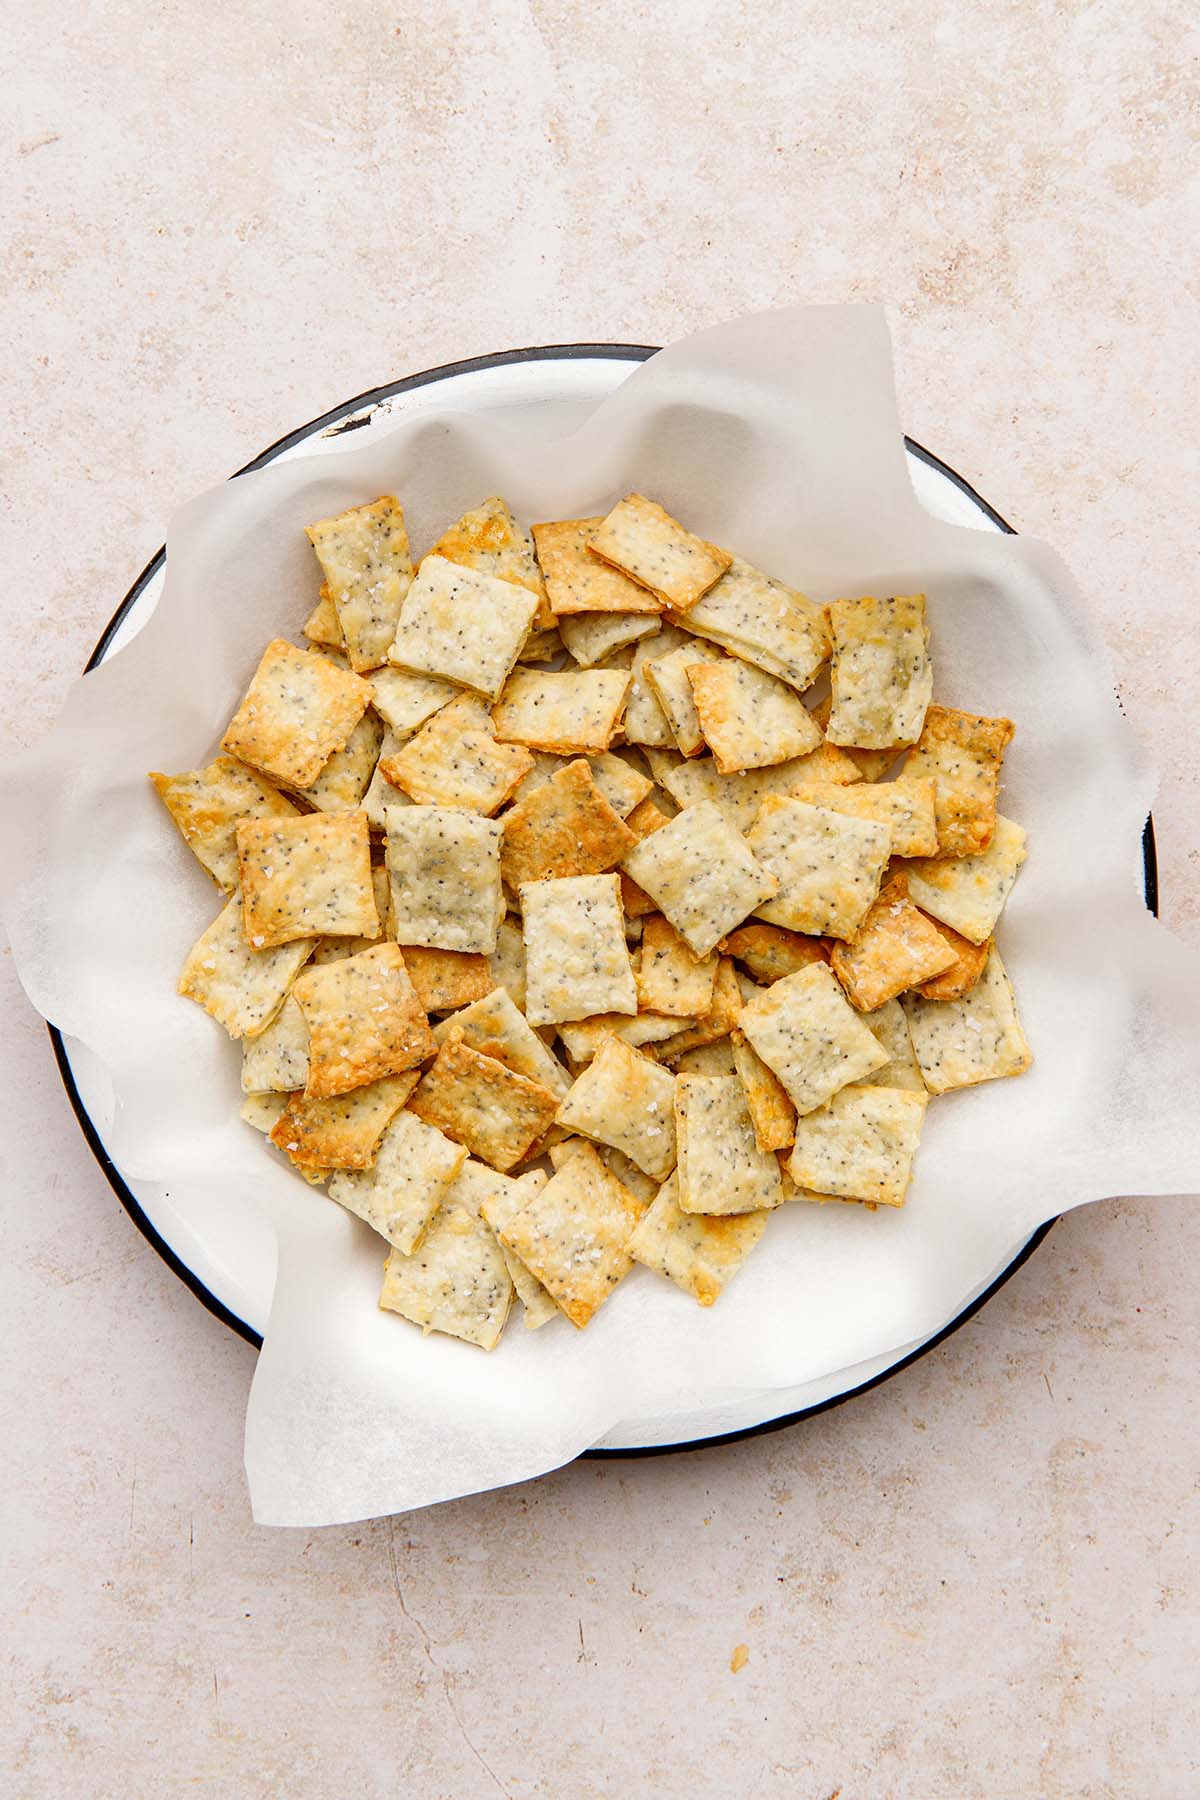 White cheddar crackers in a white dish lined with parchment paper.